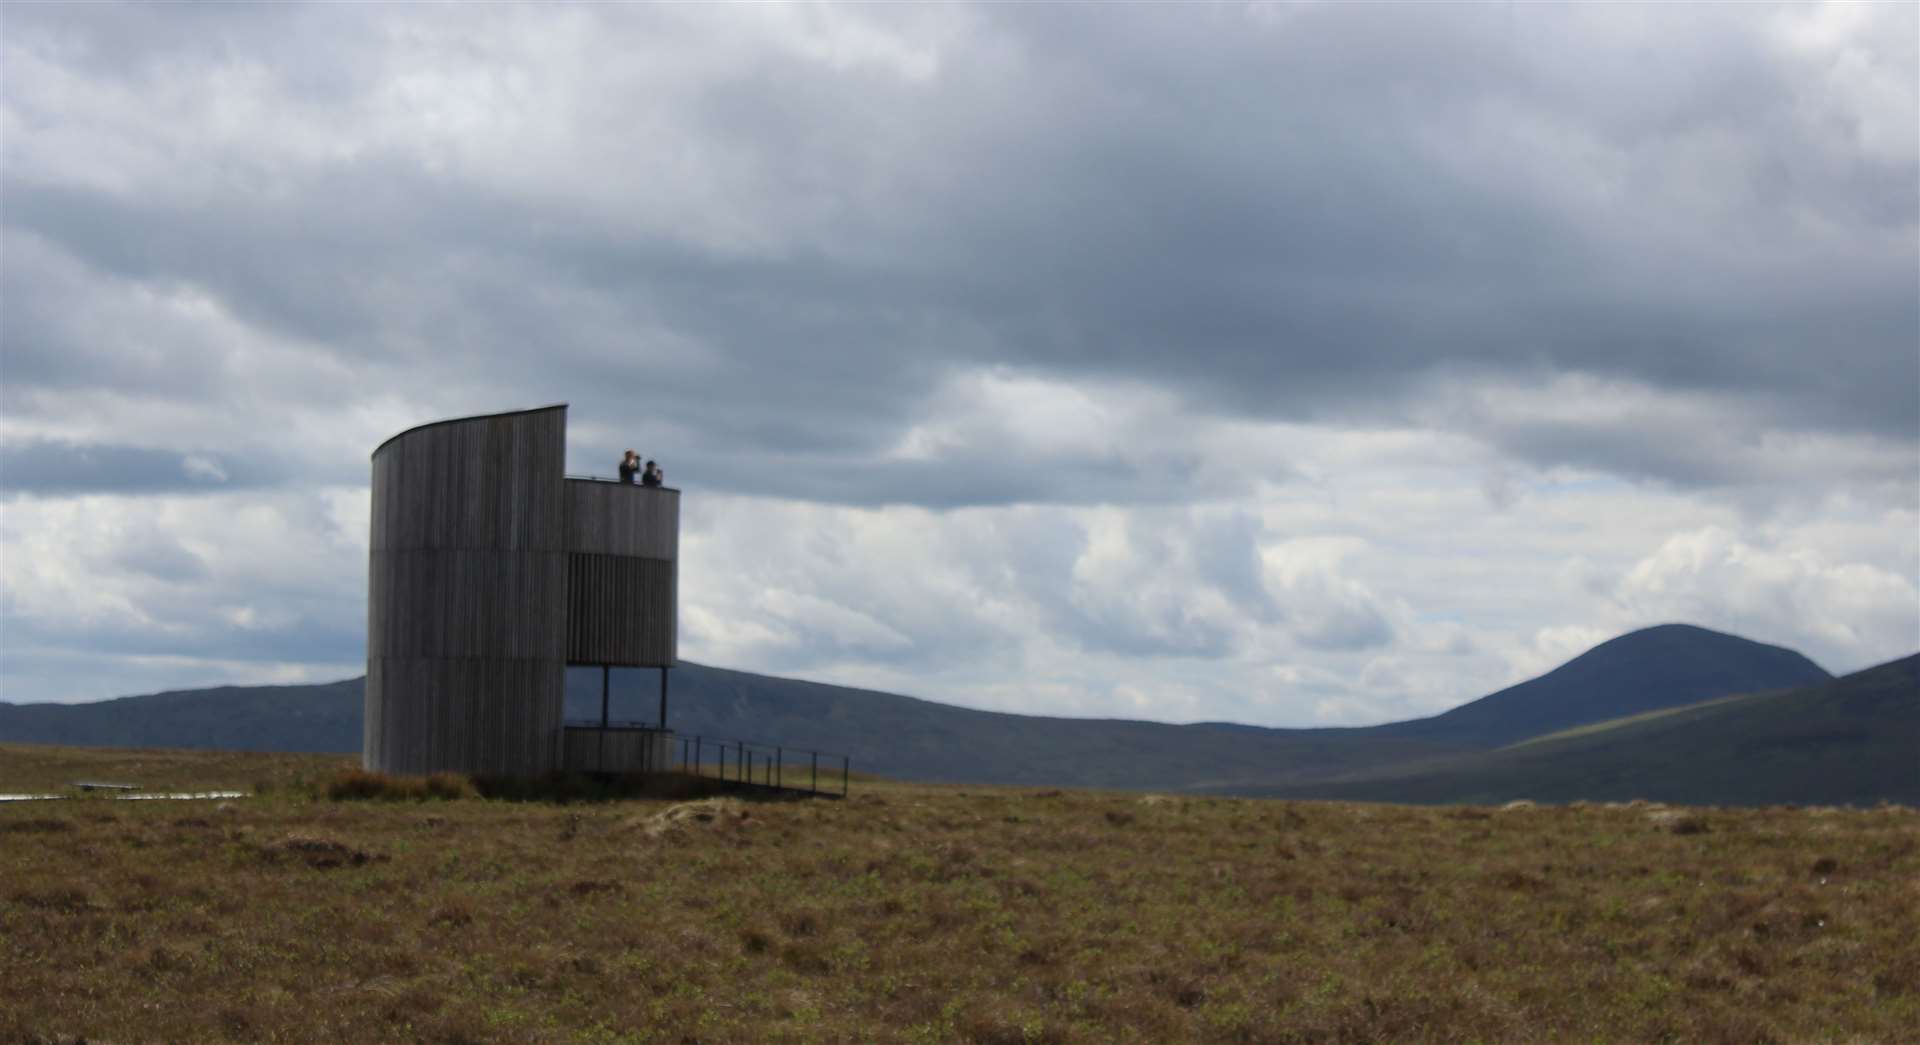 The lookout tower at the Forsinard site, which offers a picturesque view of the peatlands.